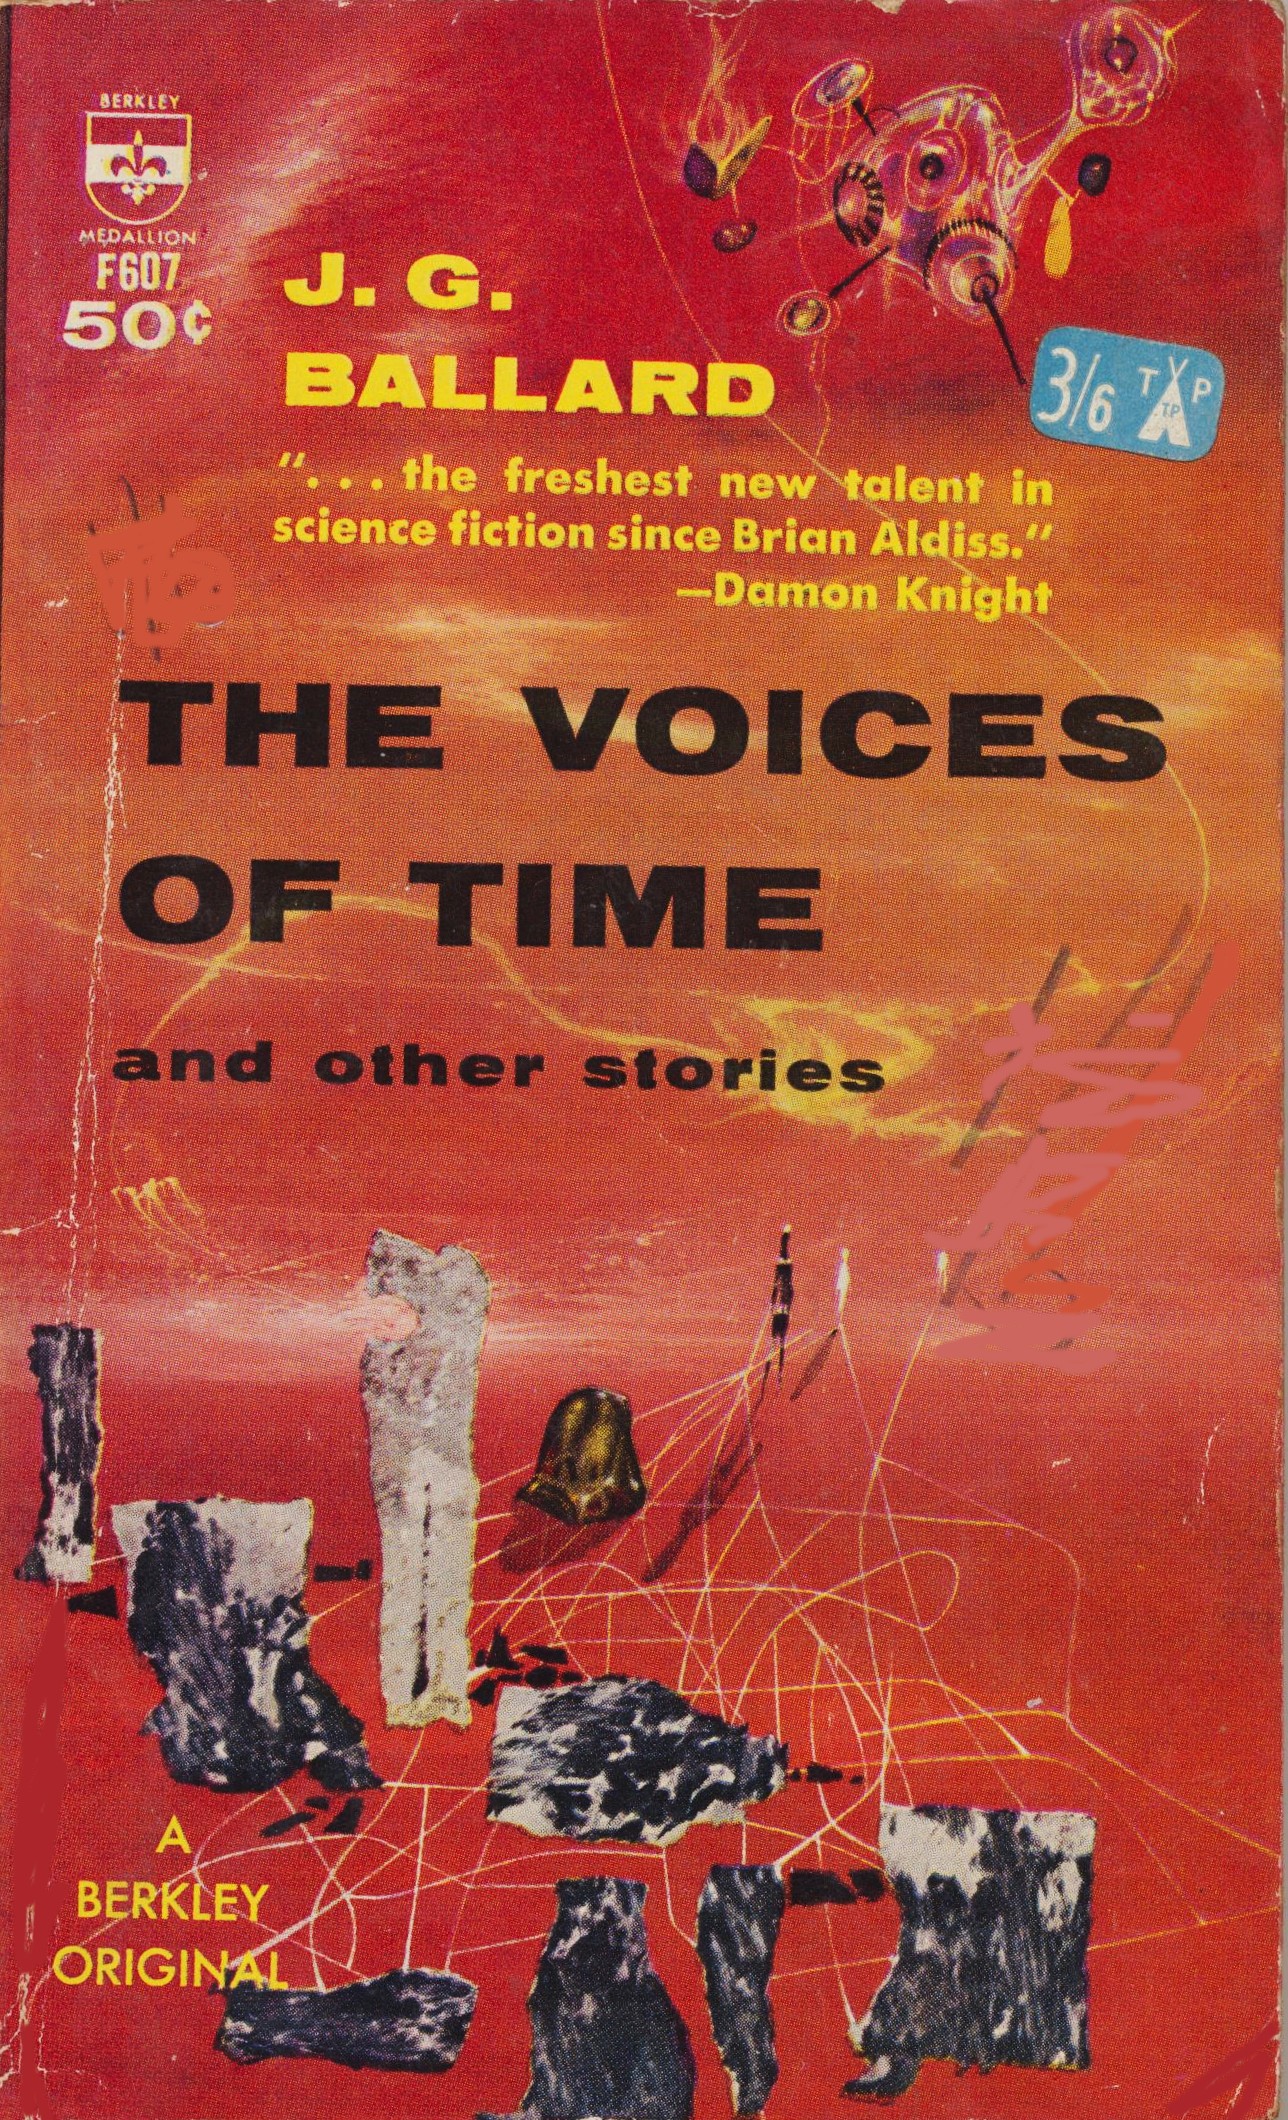 The Voices of Time